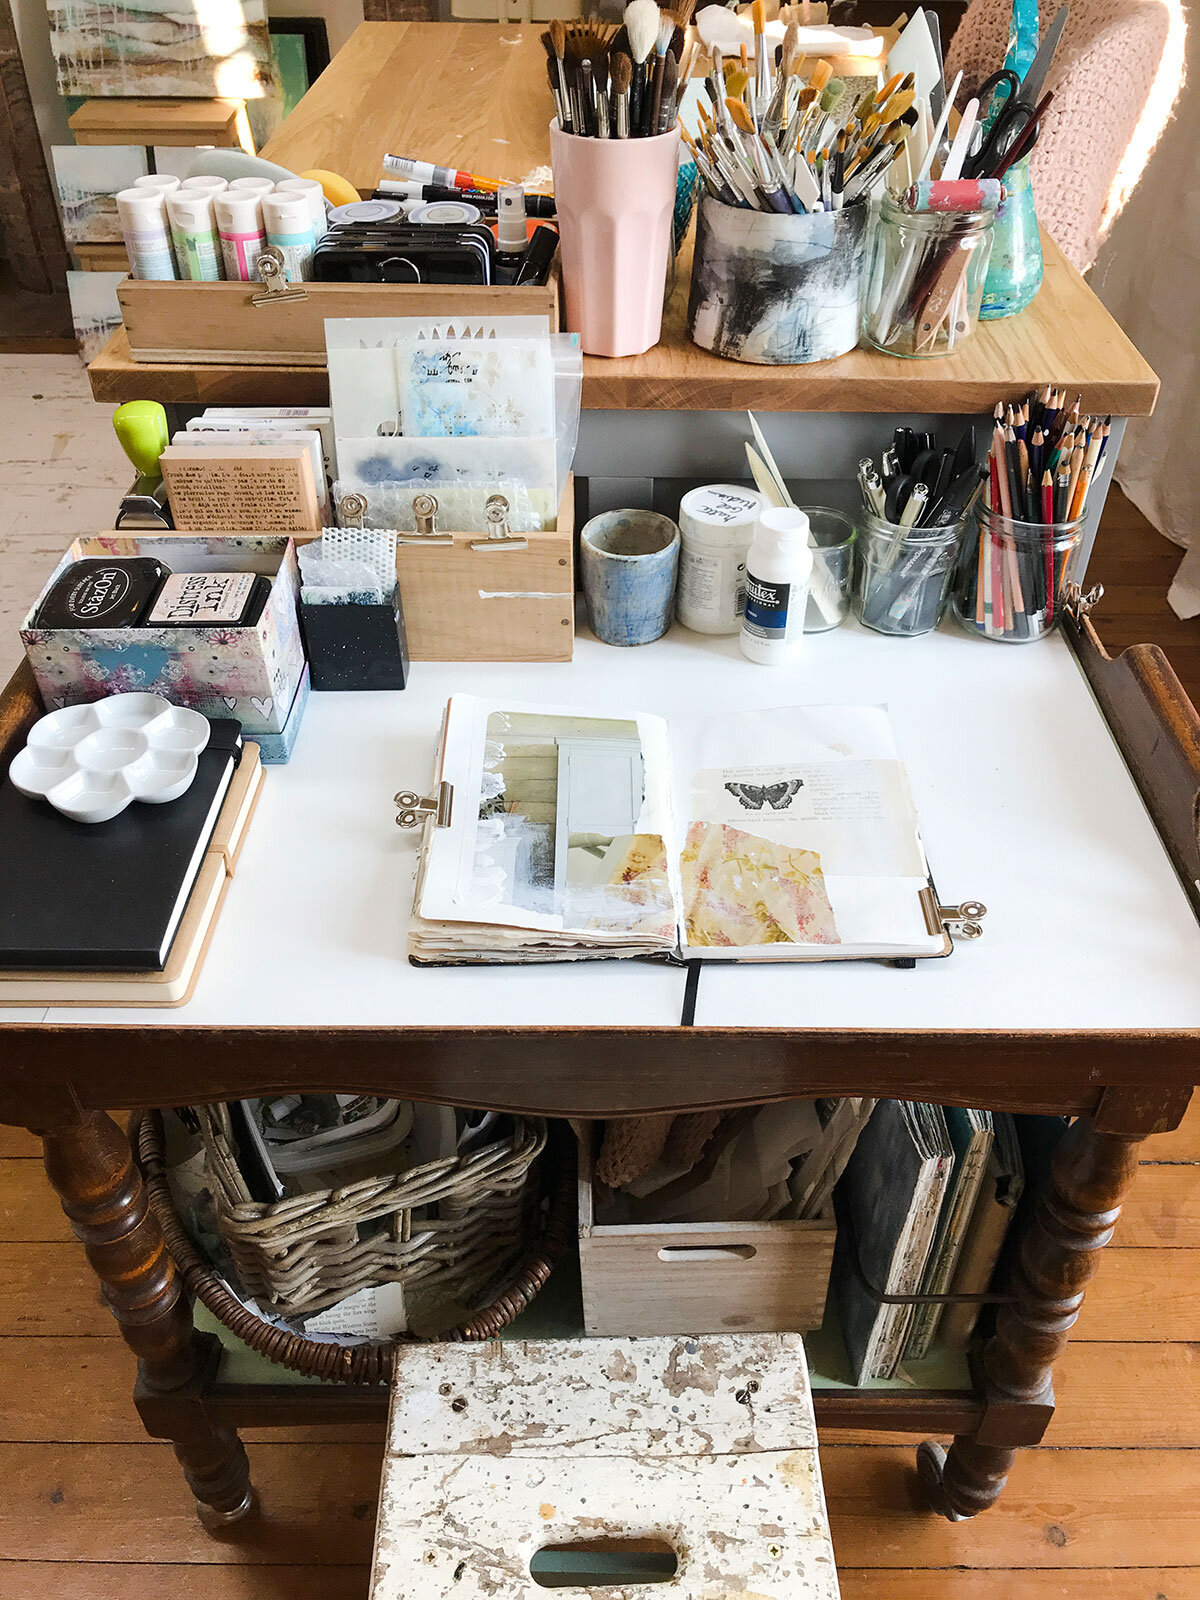 Organizing Art Journal Supplies for Creativity and Inspiration